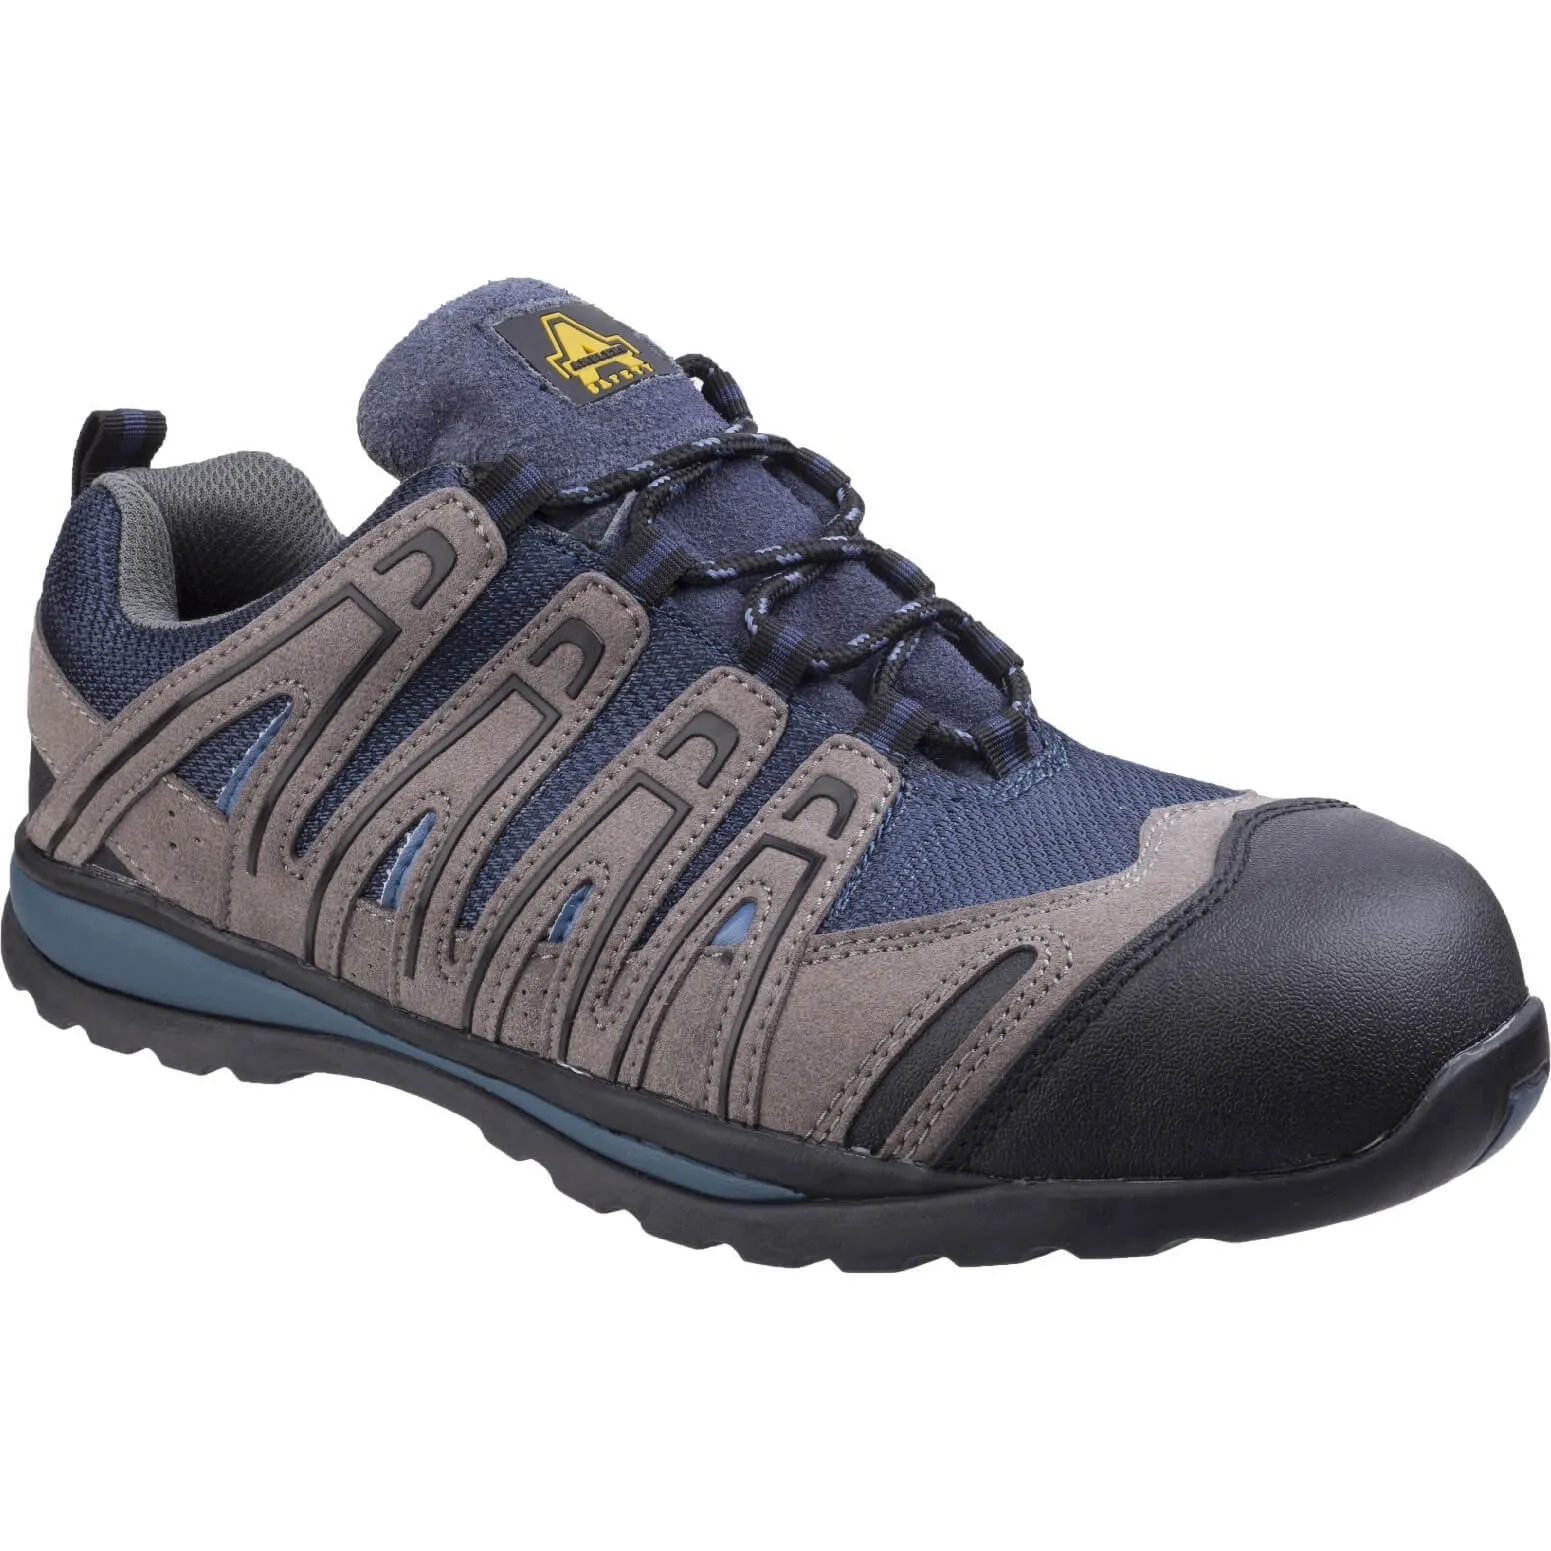 Amblers Safety FS34C Metal Free Lightweight Lace Up Safety Trainer - Blue, Size 4